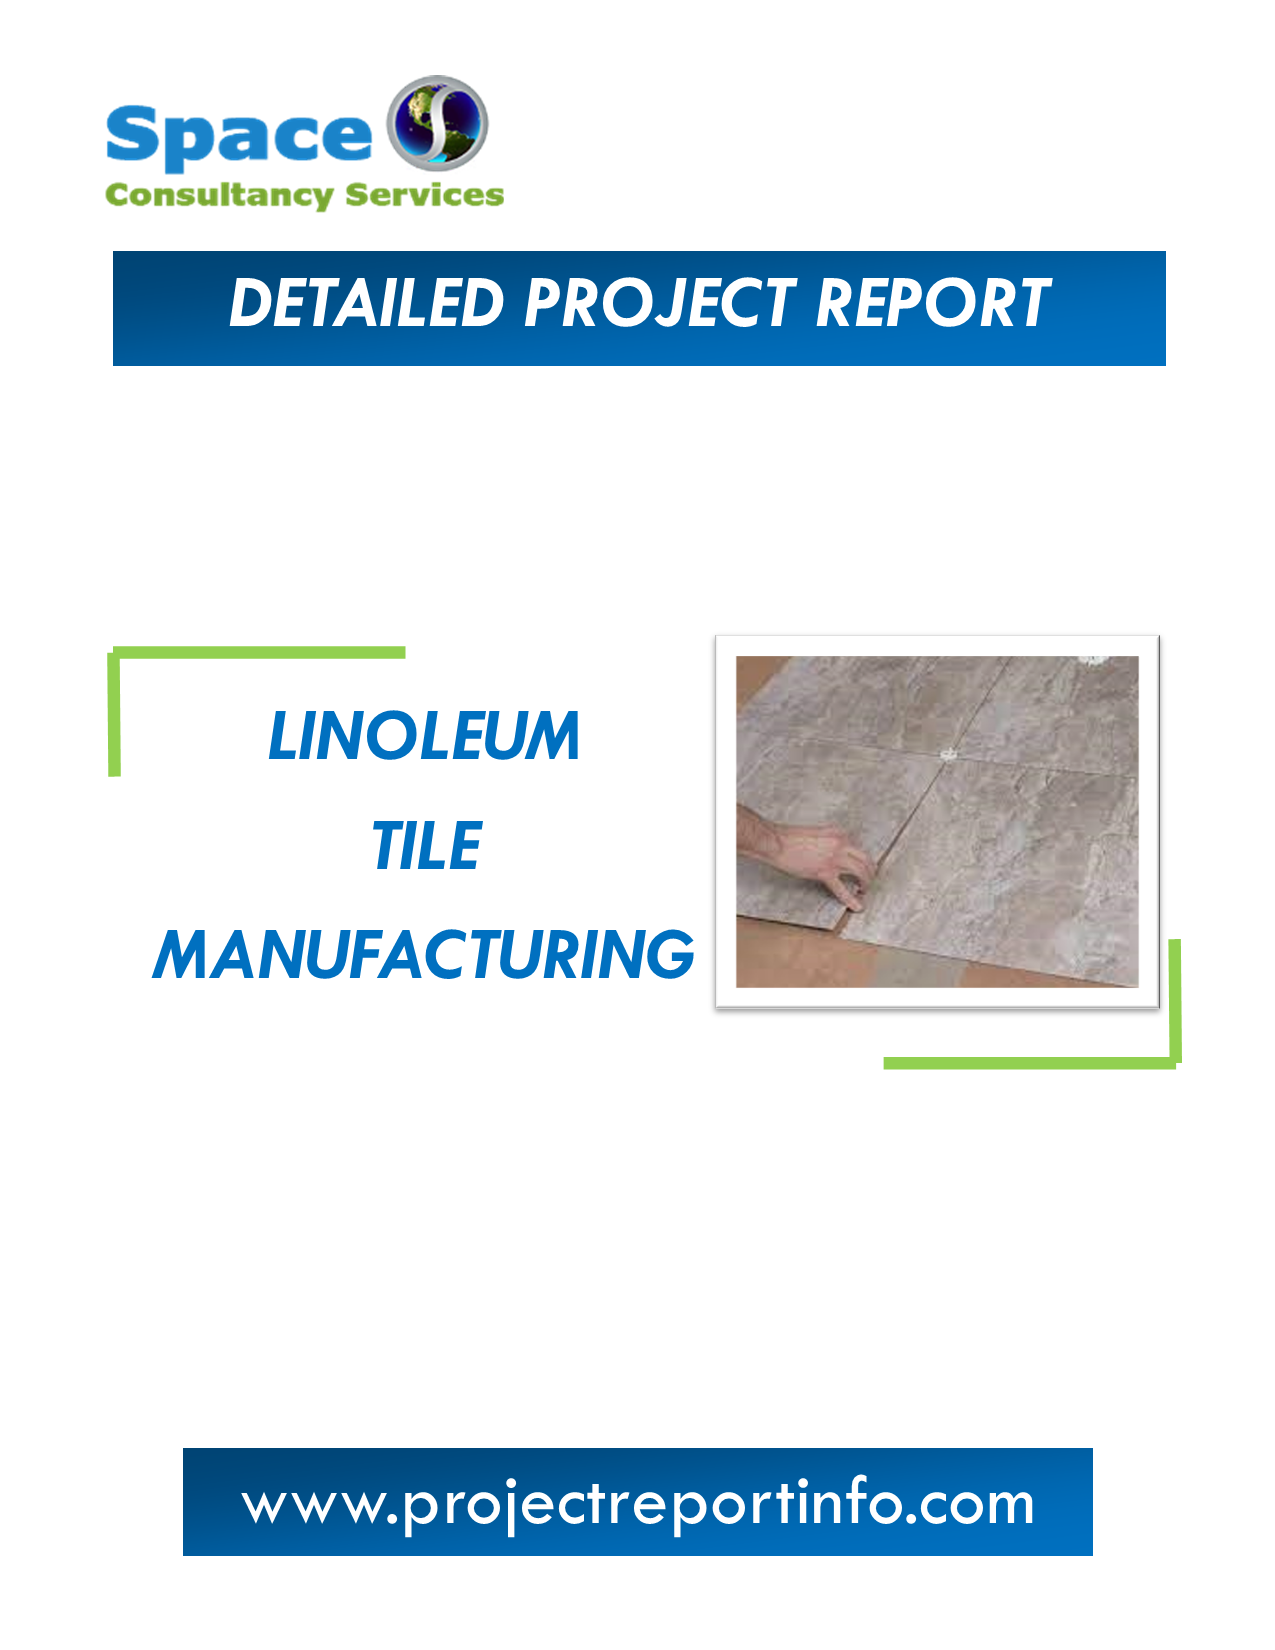 Project Report on Linoleum Tile Manufacturing